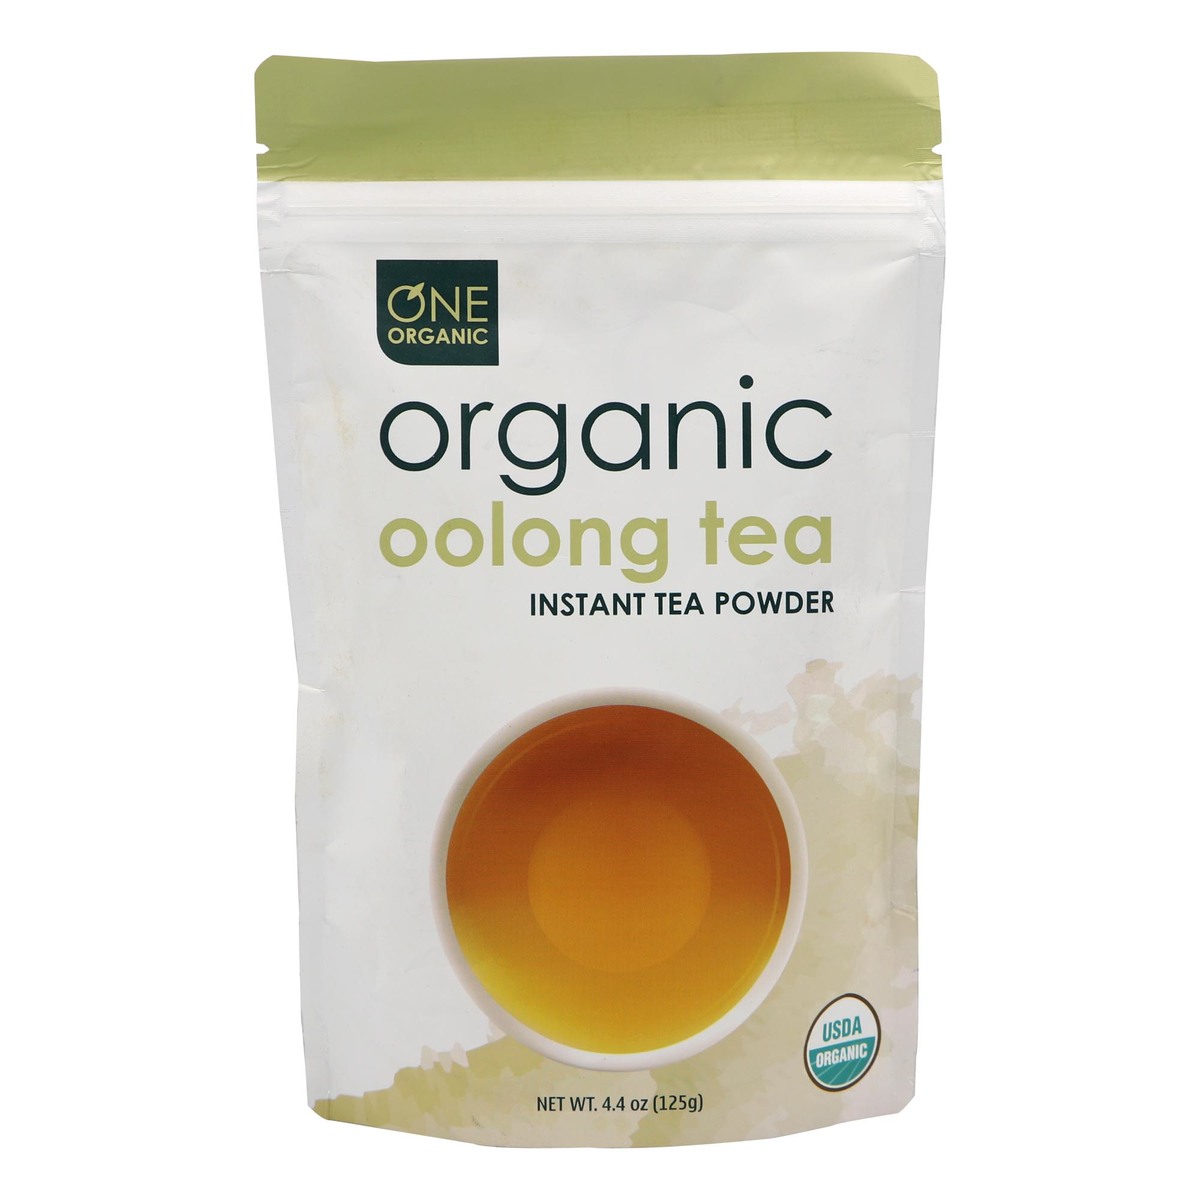 One Organic Instant Organic Oolong Tea Powder 125g Online at Best Price ...